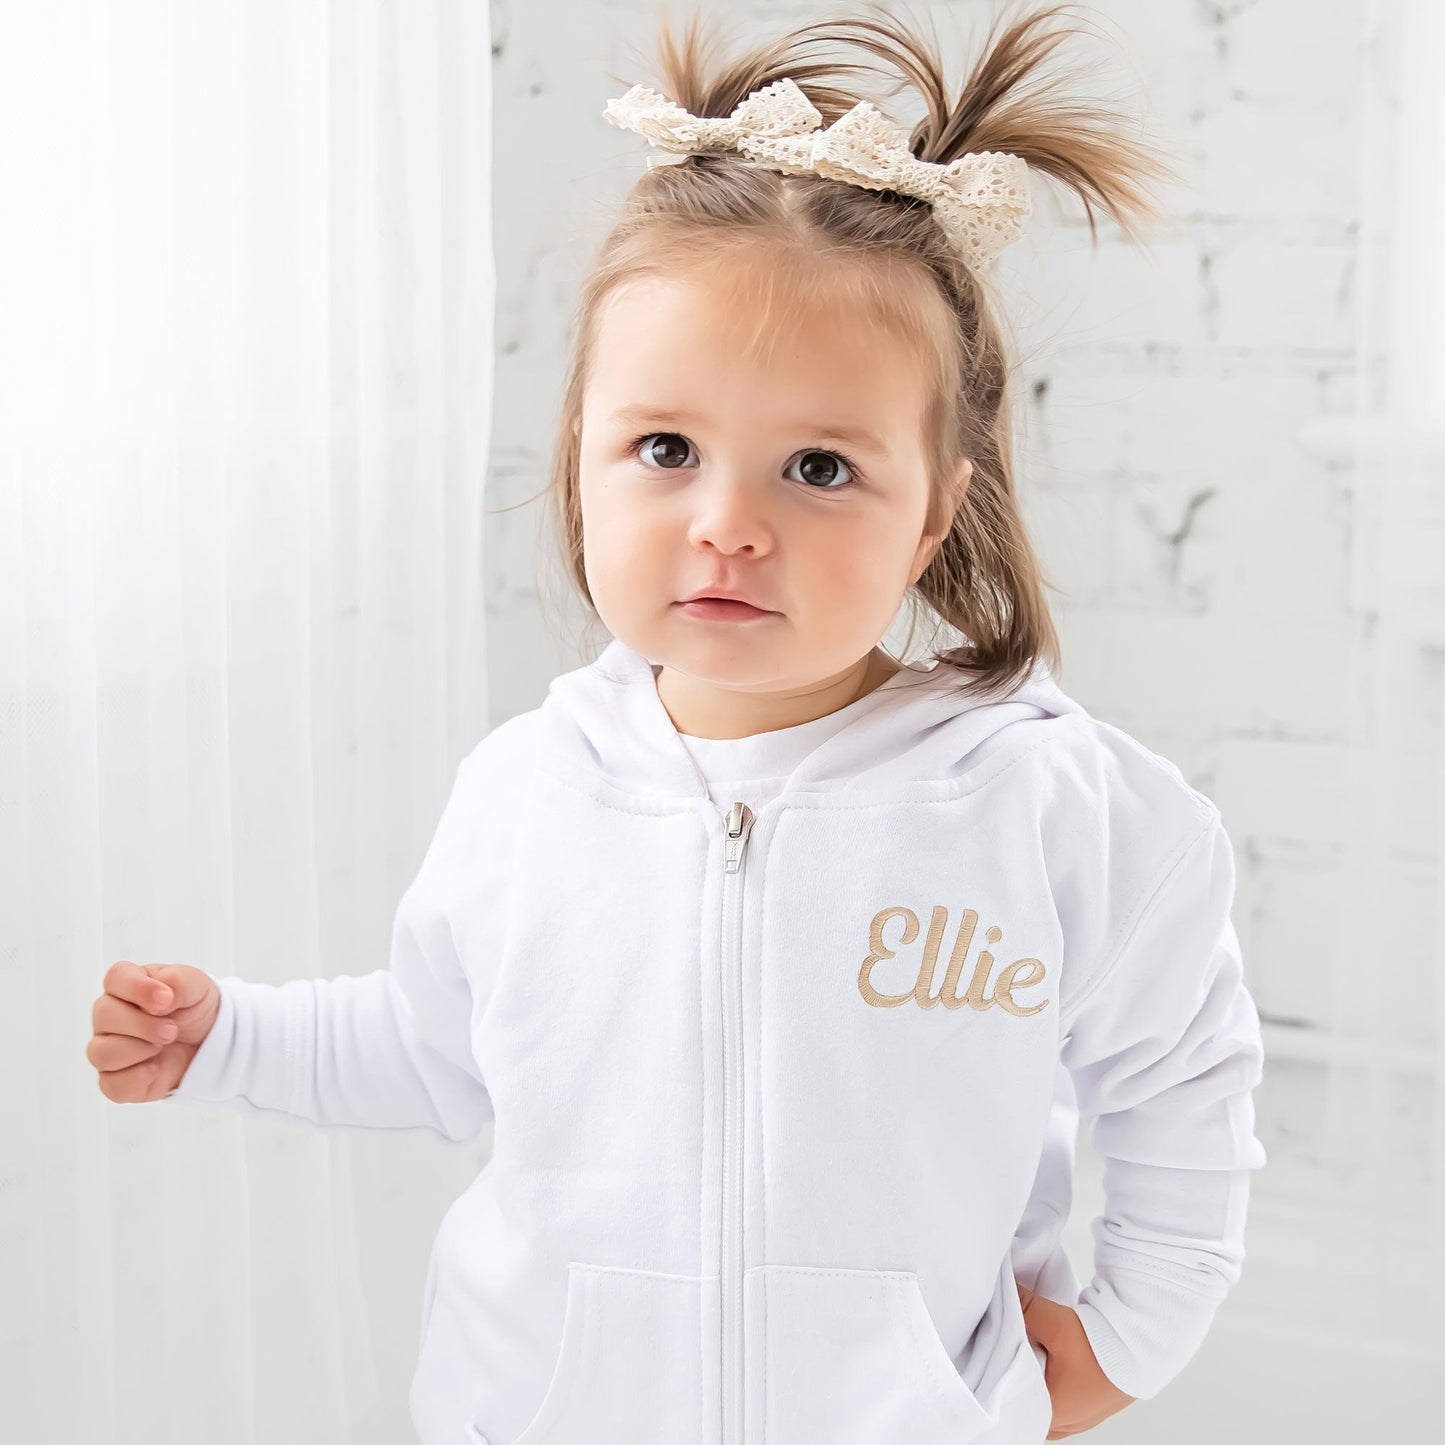 Little girl with pigtails wearing a white full zip hooded jacket featuring a custom name embroidery on the left chest in camel thread